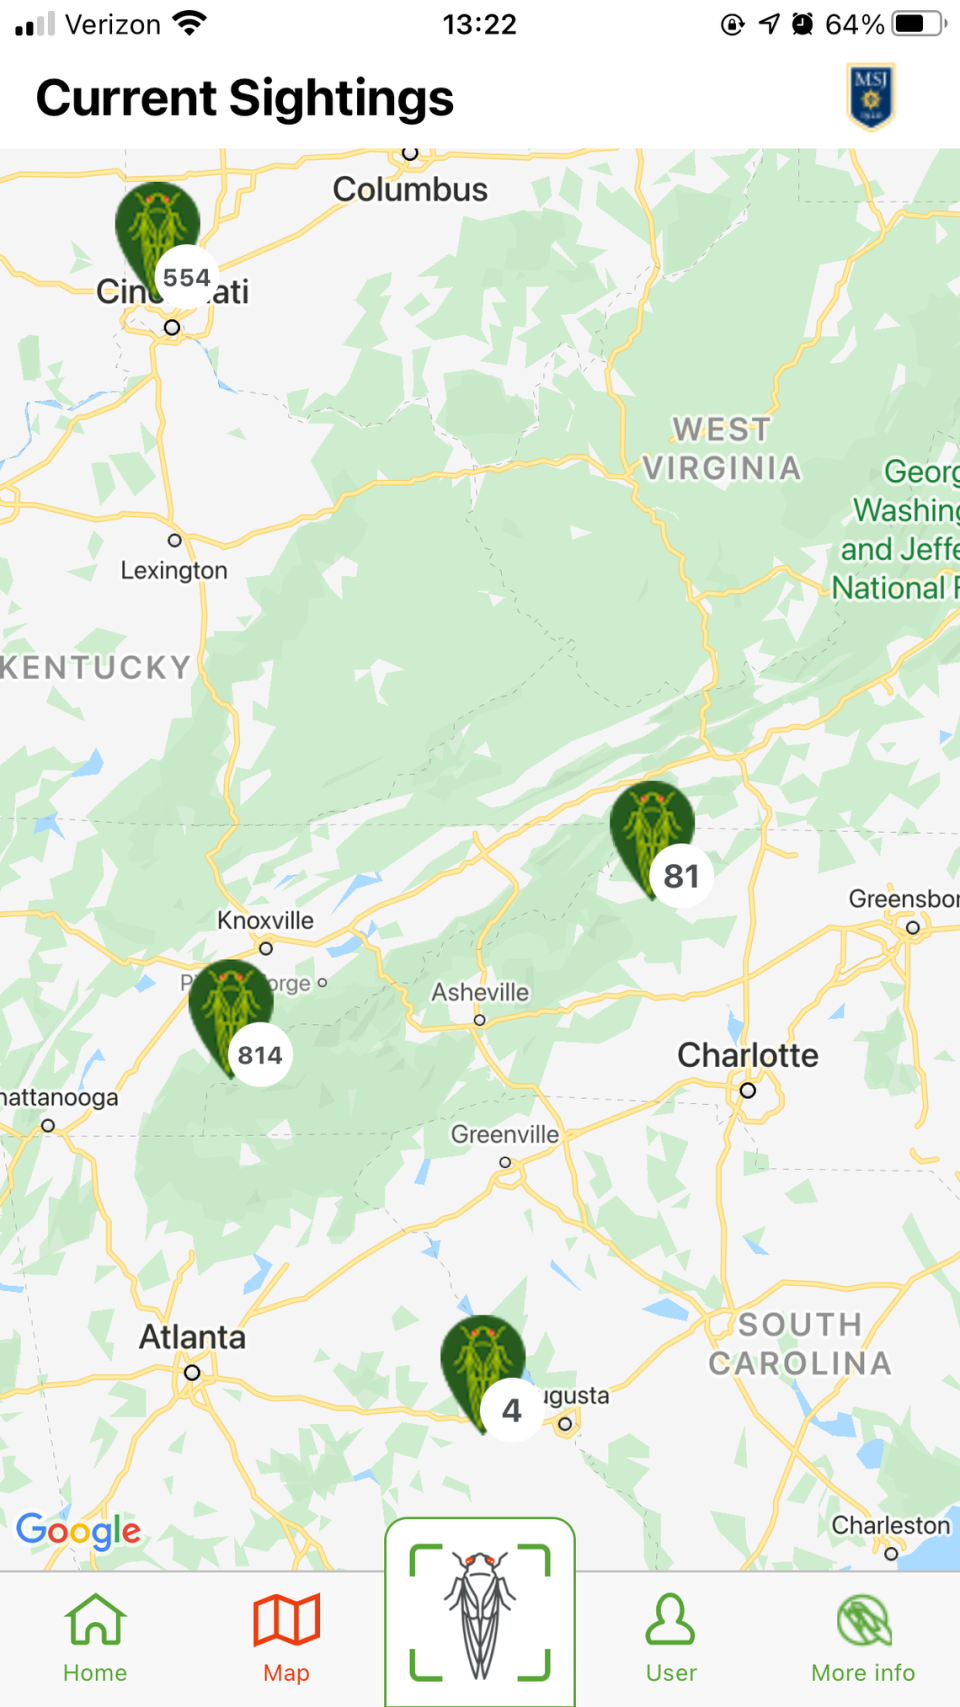 Most of the Brood X sightings in North Carolina appear to have occurred near Wilkesboro.